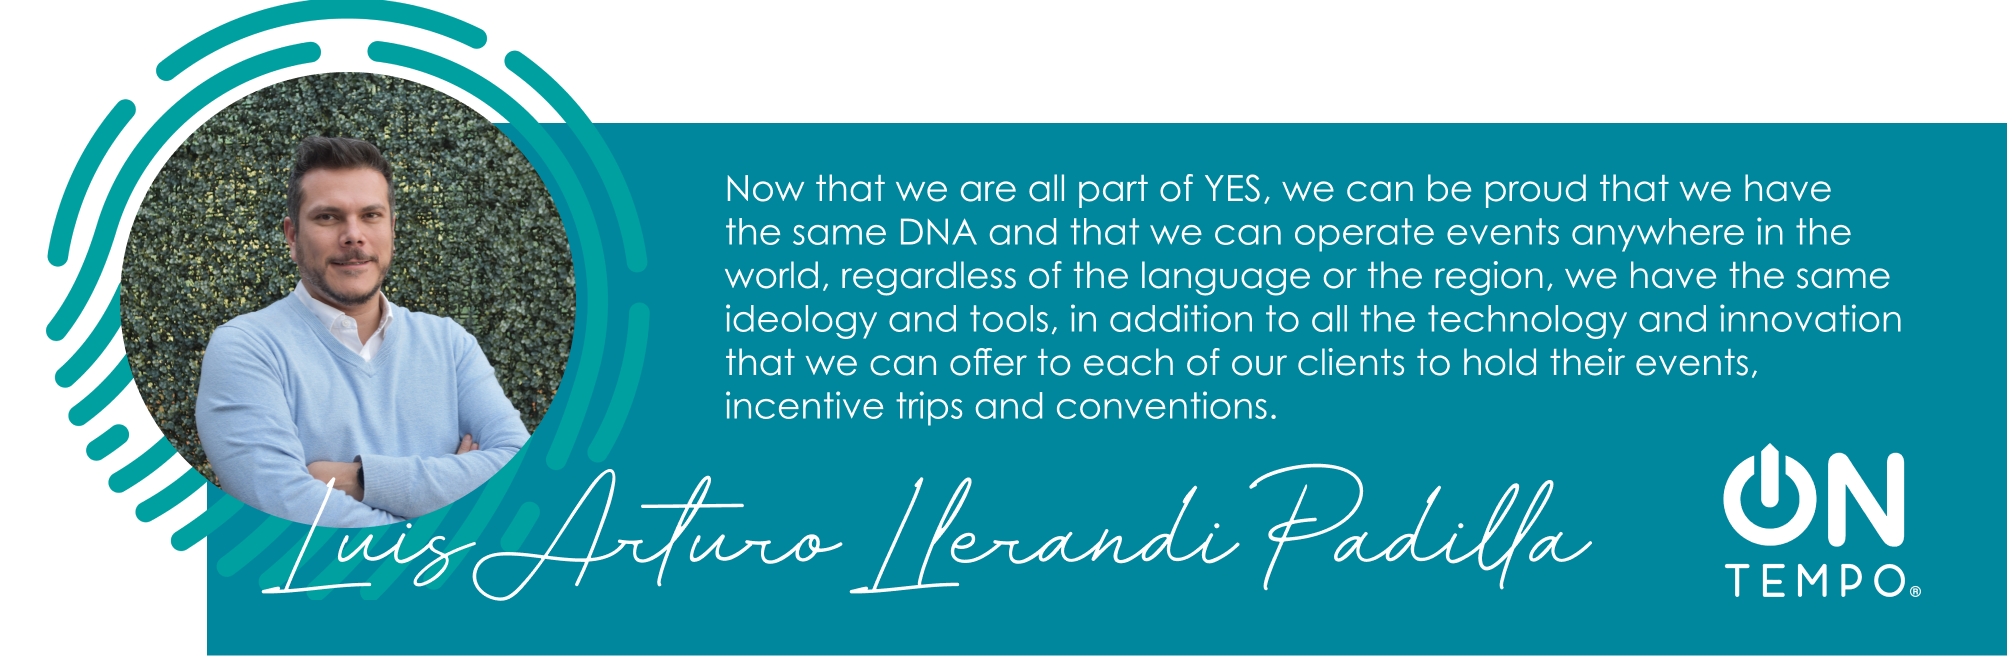 Now that we are all part of YES, we can be proud that we have  the same DNA and that we can operate events anywhere in the world, regardless of the language or the region, we have the same ideology and tools, in addition to all the technology and innovation that we can offer to each of our clients to hold their events, incentive trips and conventions.